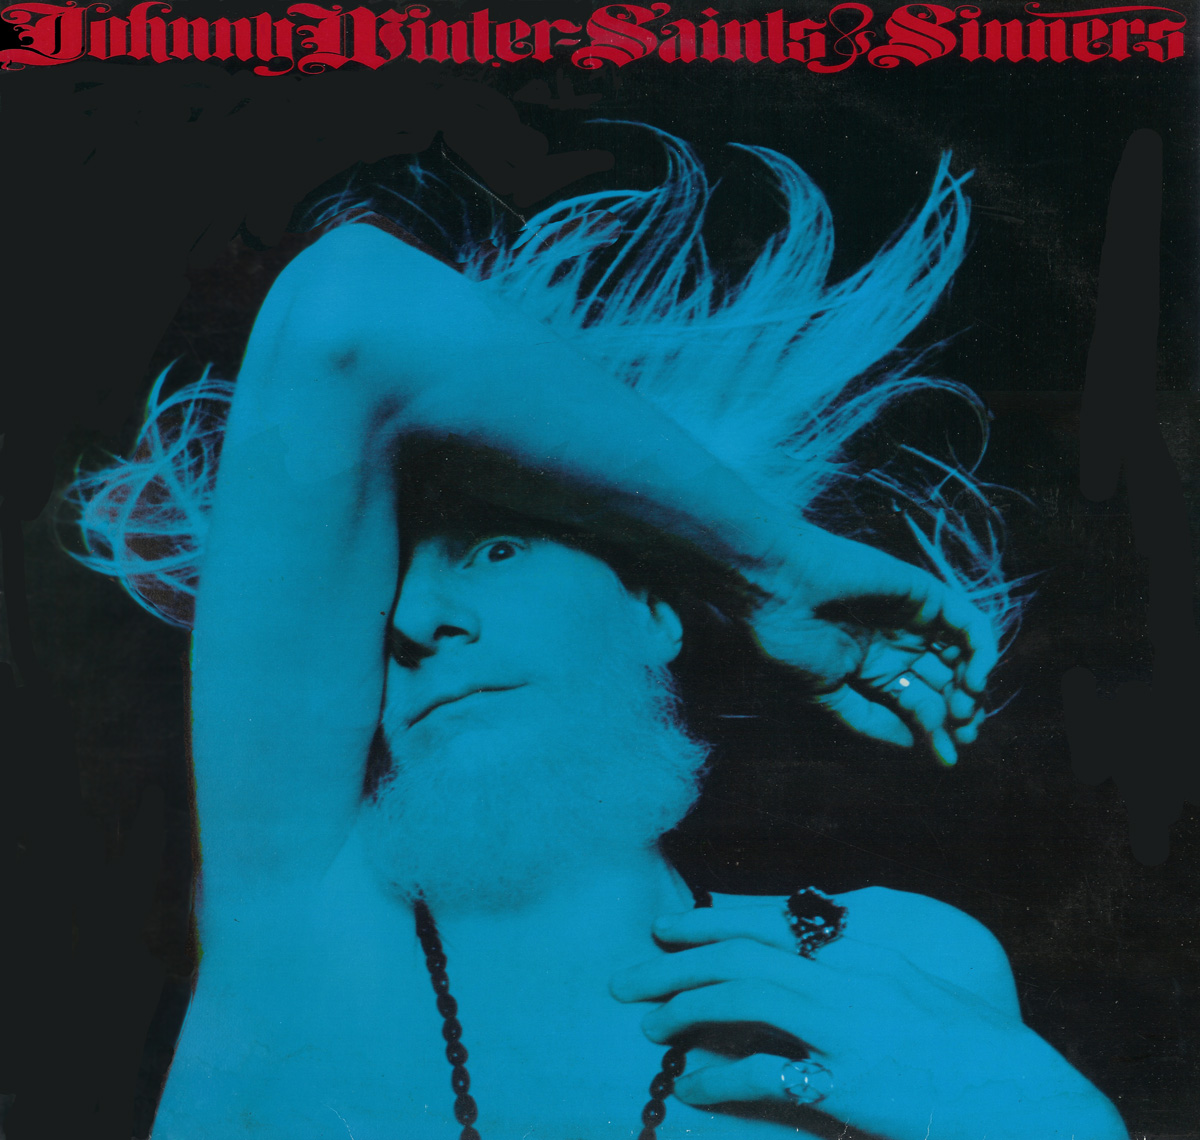 JOHNNY WINTER - Saints and Sinners front cover photo https://vinyl-records.nl